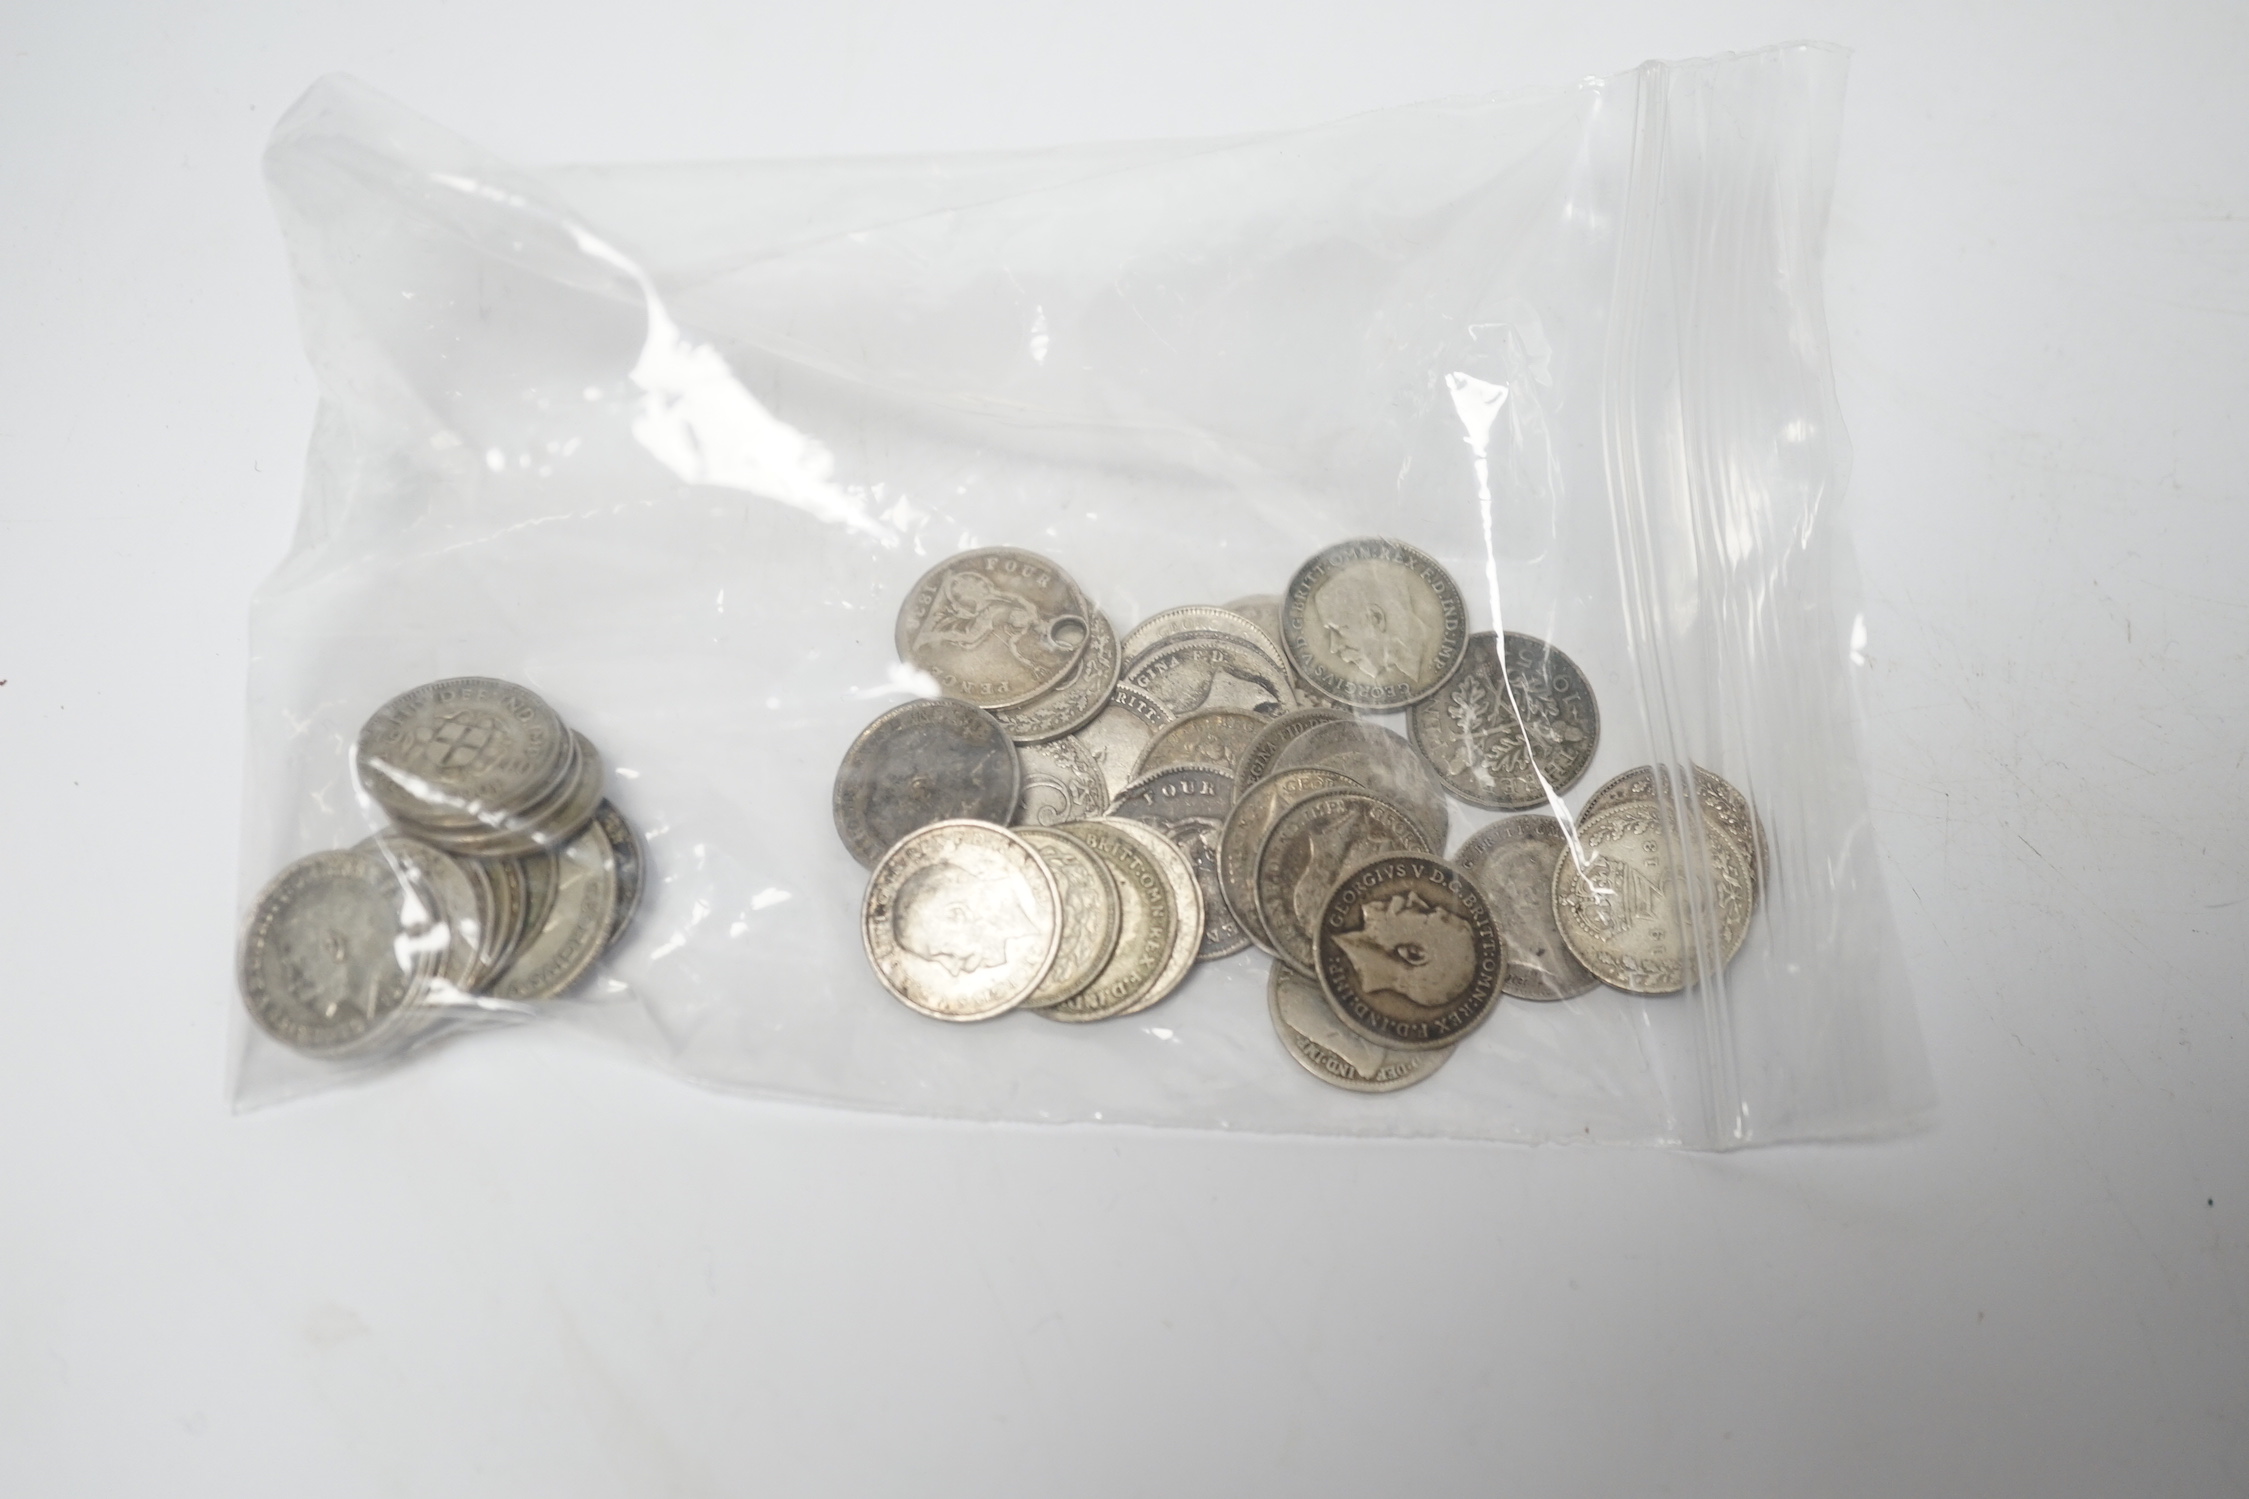 Fifty-two late 19th and early 20th century 3d coins